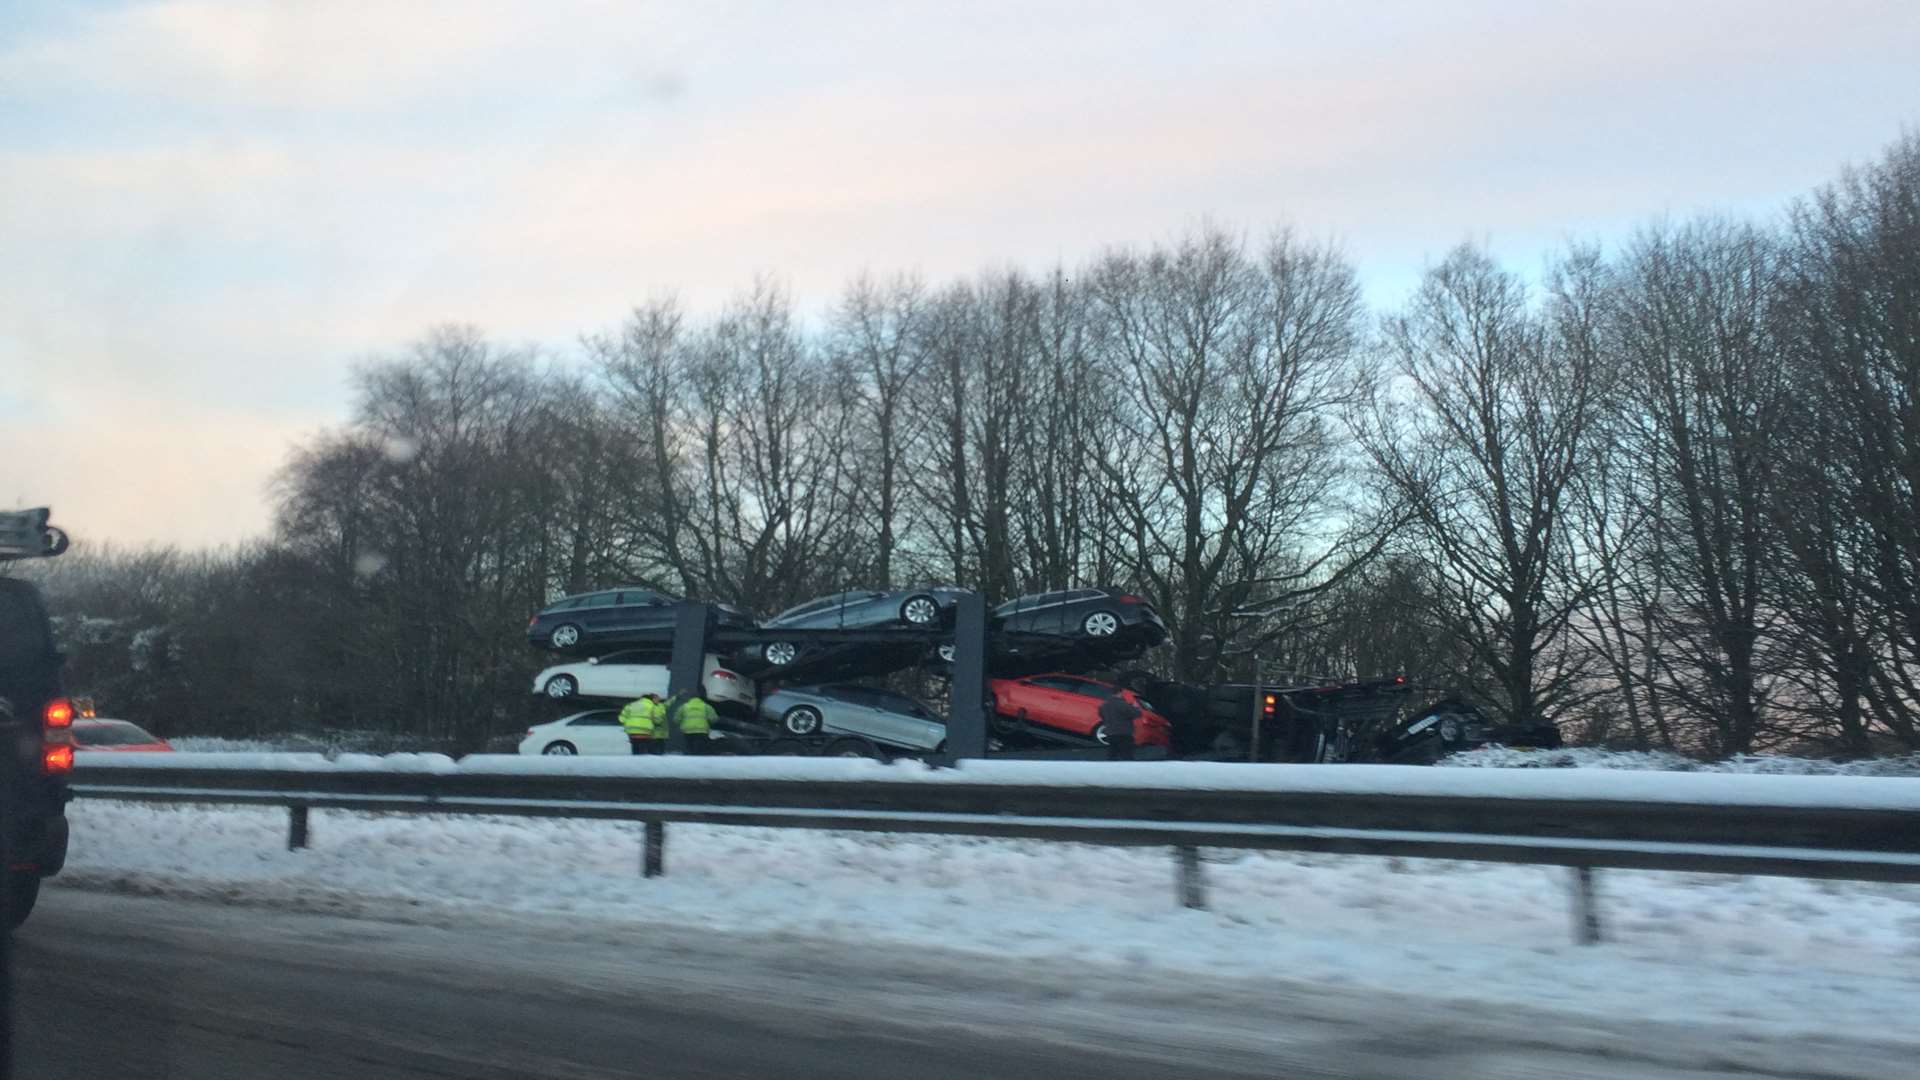 This transporter lorry jack-knifed on the A249.